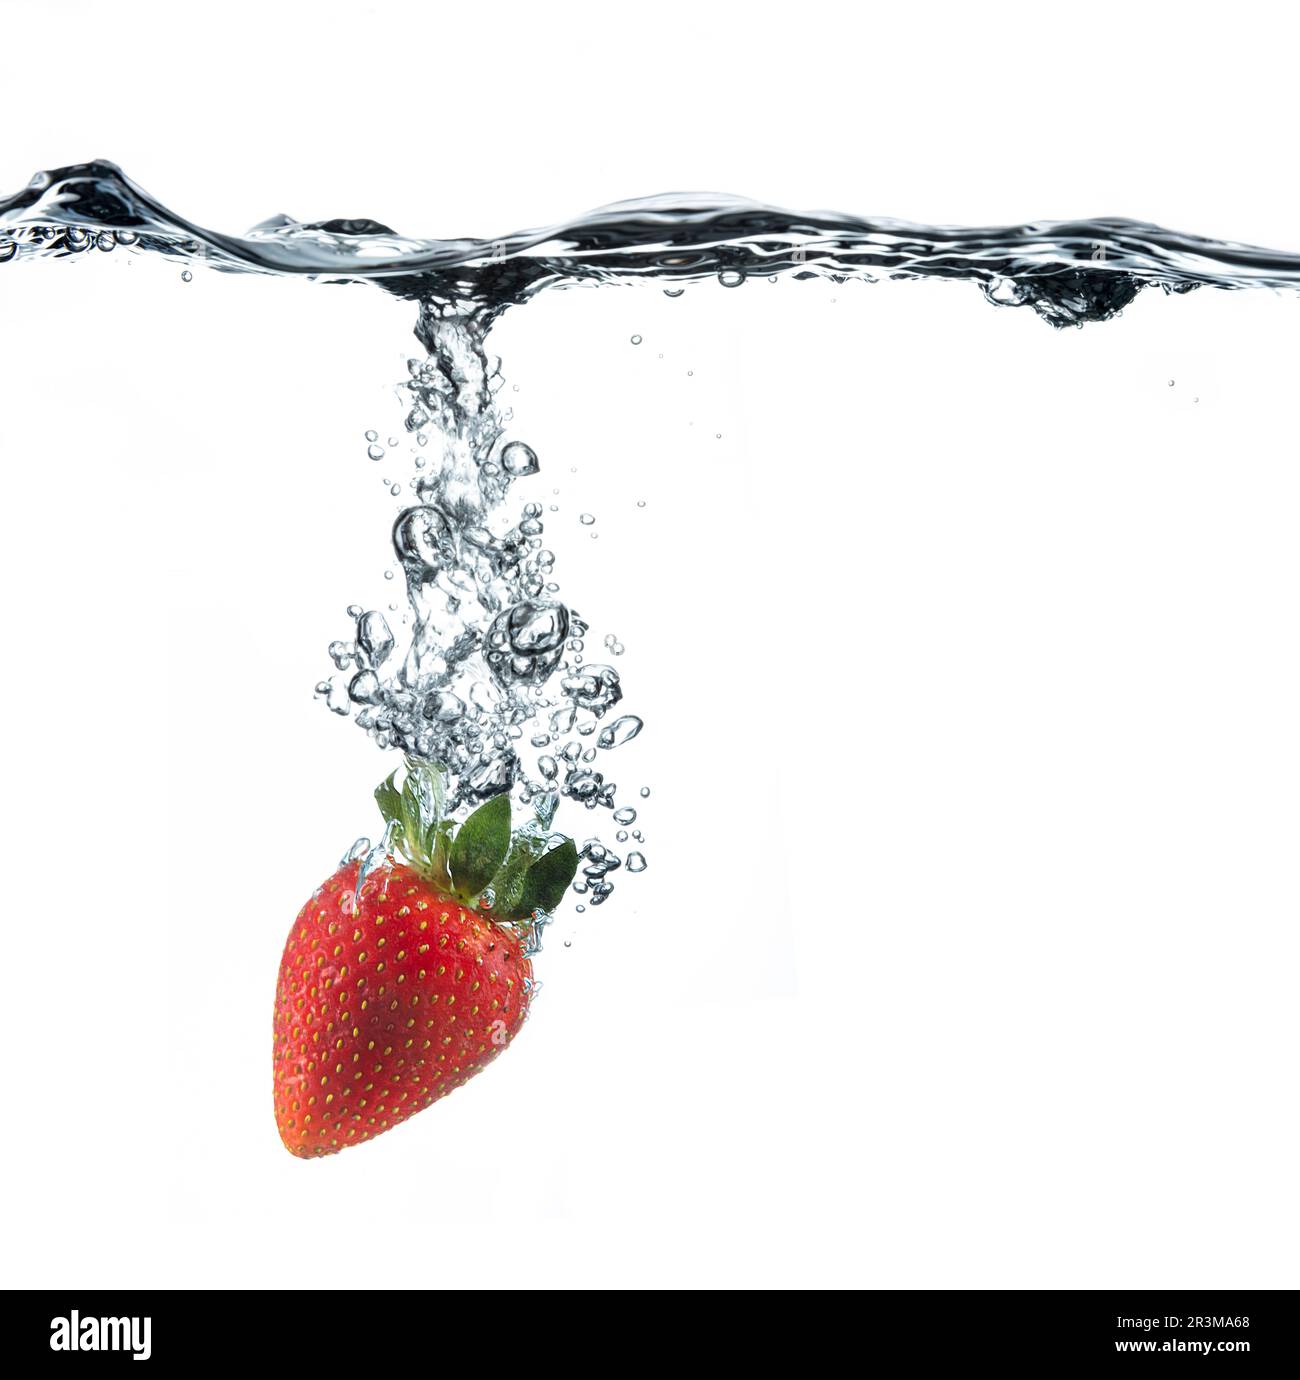 A vibrant red single strawberry dropped into crystal clear water, creating a trail of bubbles and waves on the surface of the water. Stock Photo